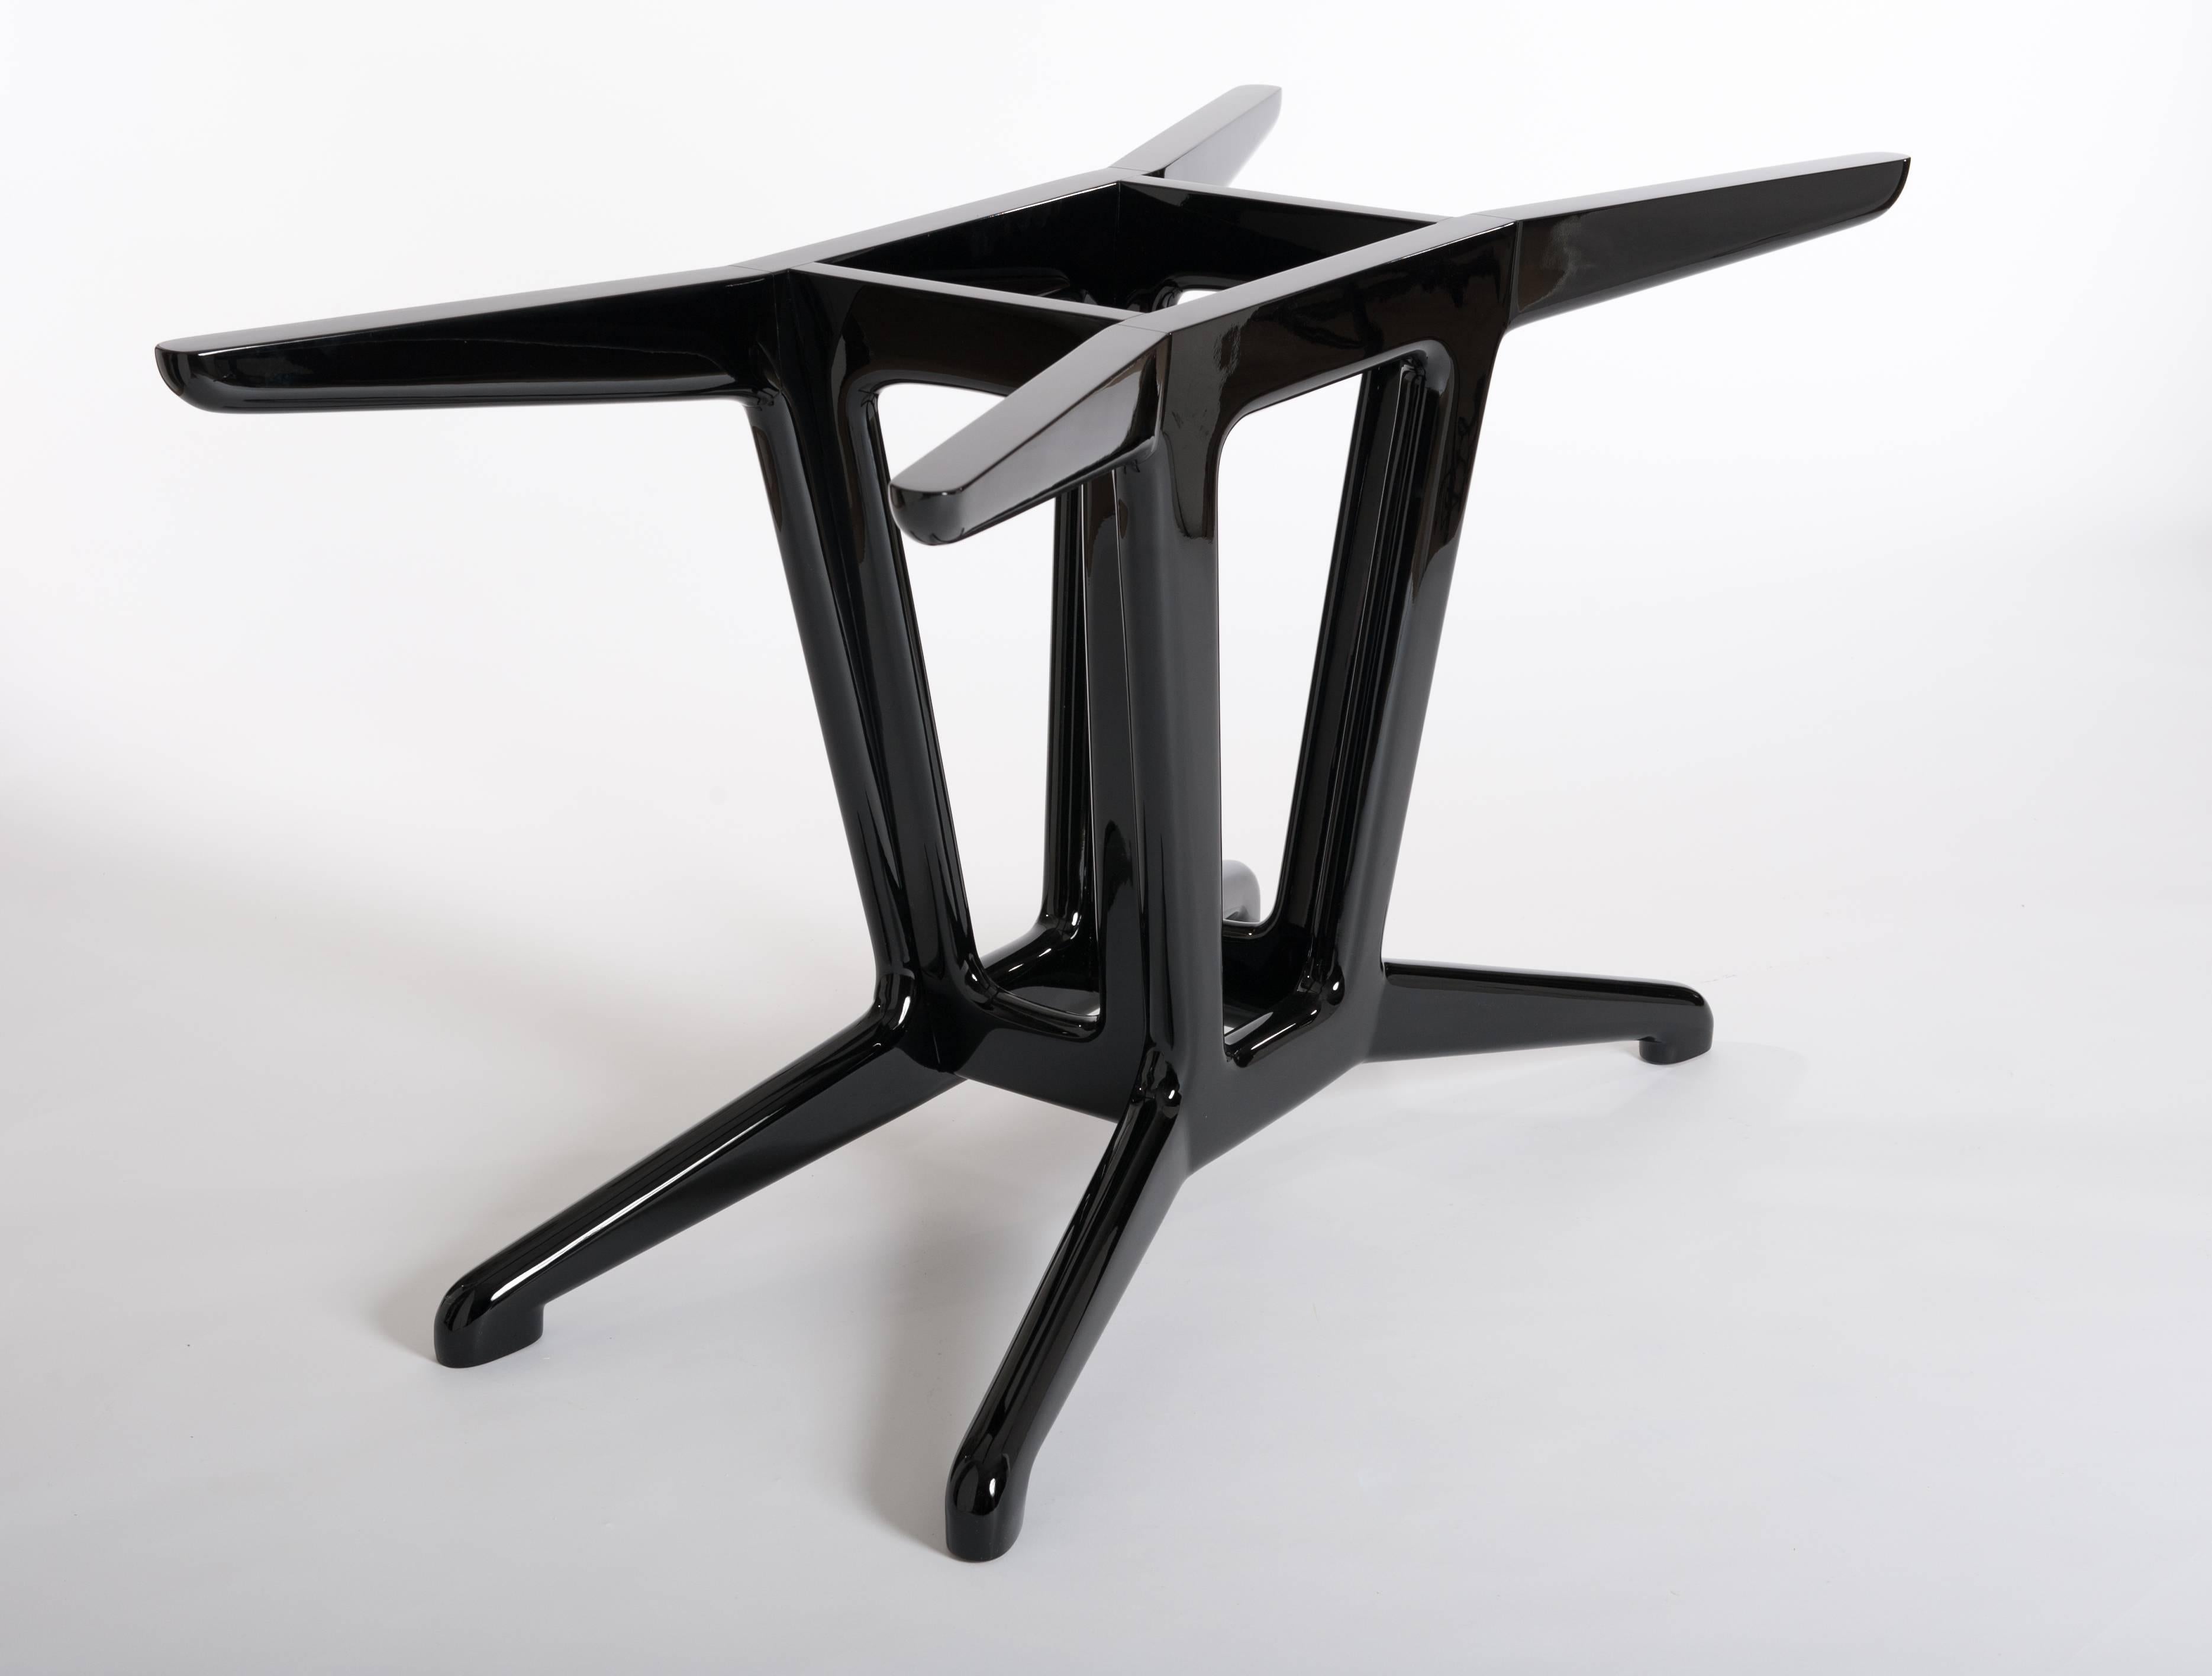 Hand-Crafted Midcentury Italian Dining Table / Desk with Re-Lacquered Wooden Base in Black